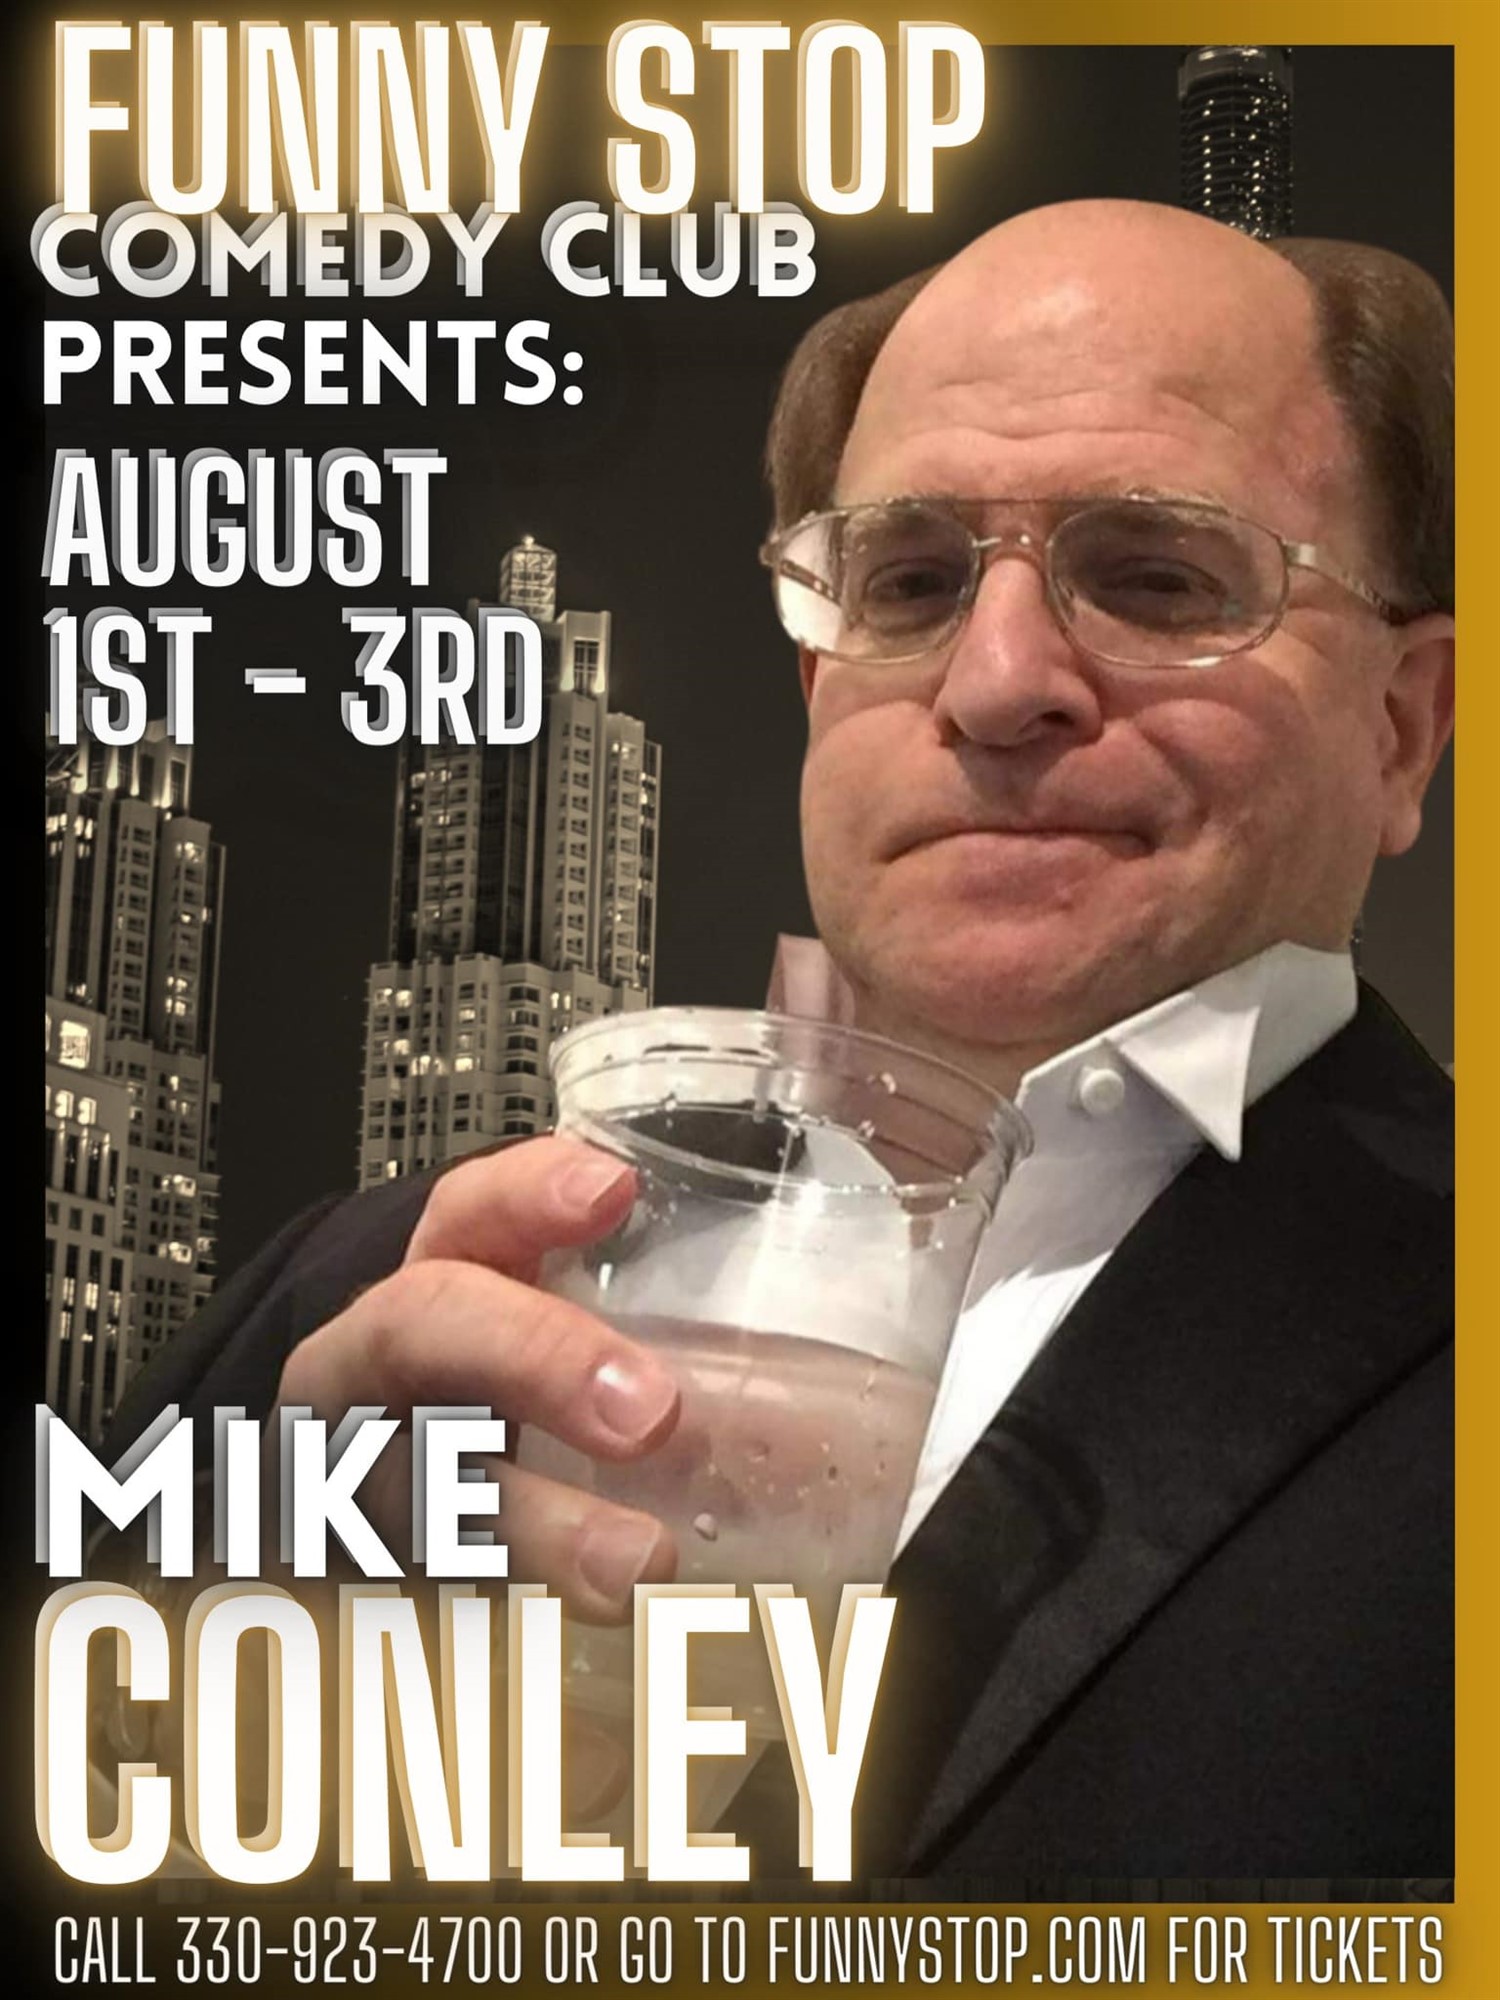 Mike Conley - Thur. 8:00 PM Show Funny Stop Comedy Club on Aug 01, 20:00@Funny Stop Comedy Club - Buy tickets and Get information on Funny Stop funnystop.online